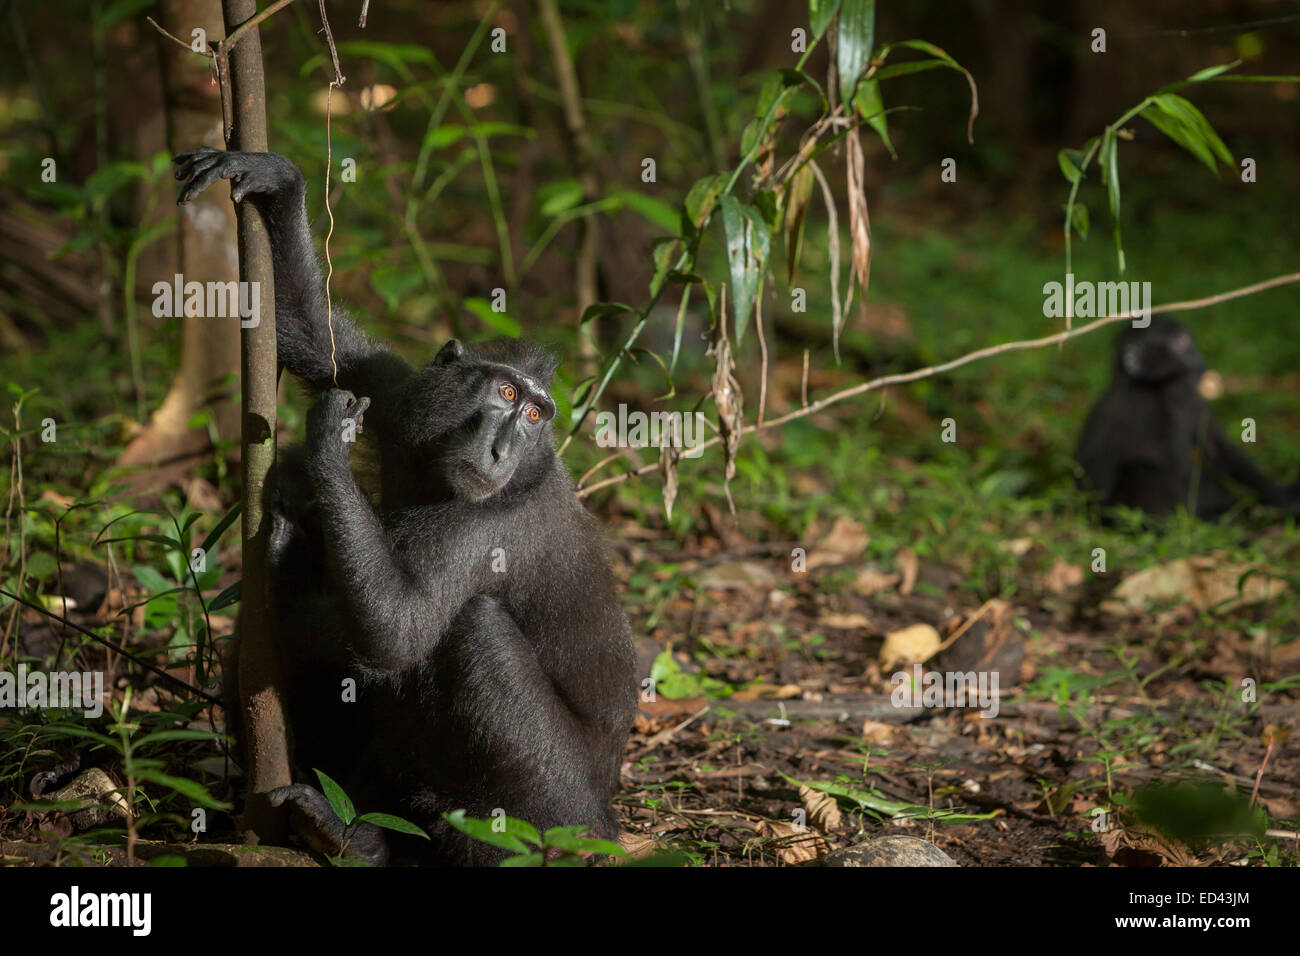 Environmental portrait of a Sulawesi black-crested macaque (Macaca nigra) in Tangkoko Nature Reserve, North Sulawesi, Indonesia. Stock Photo